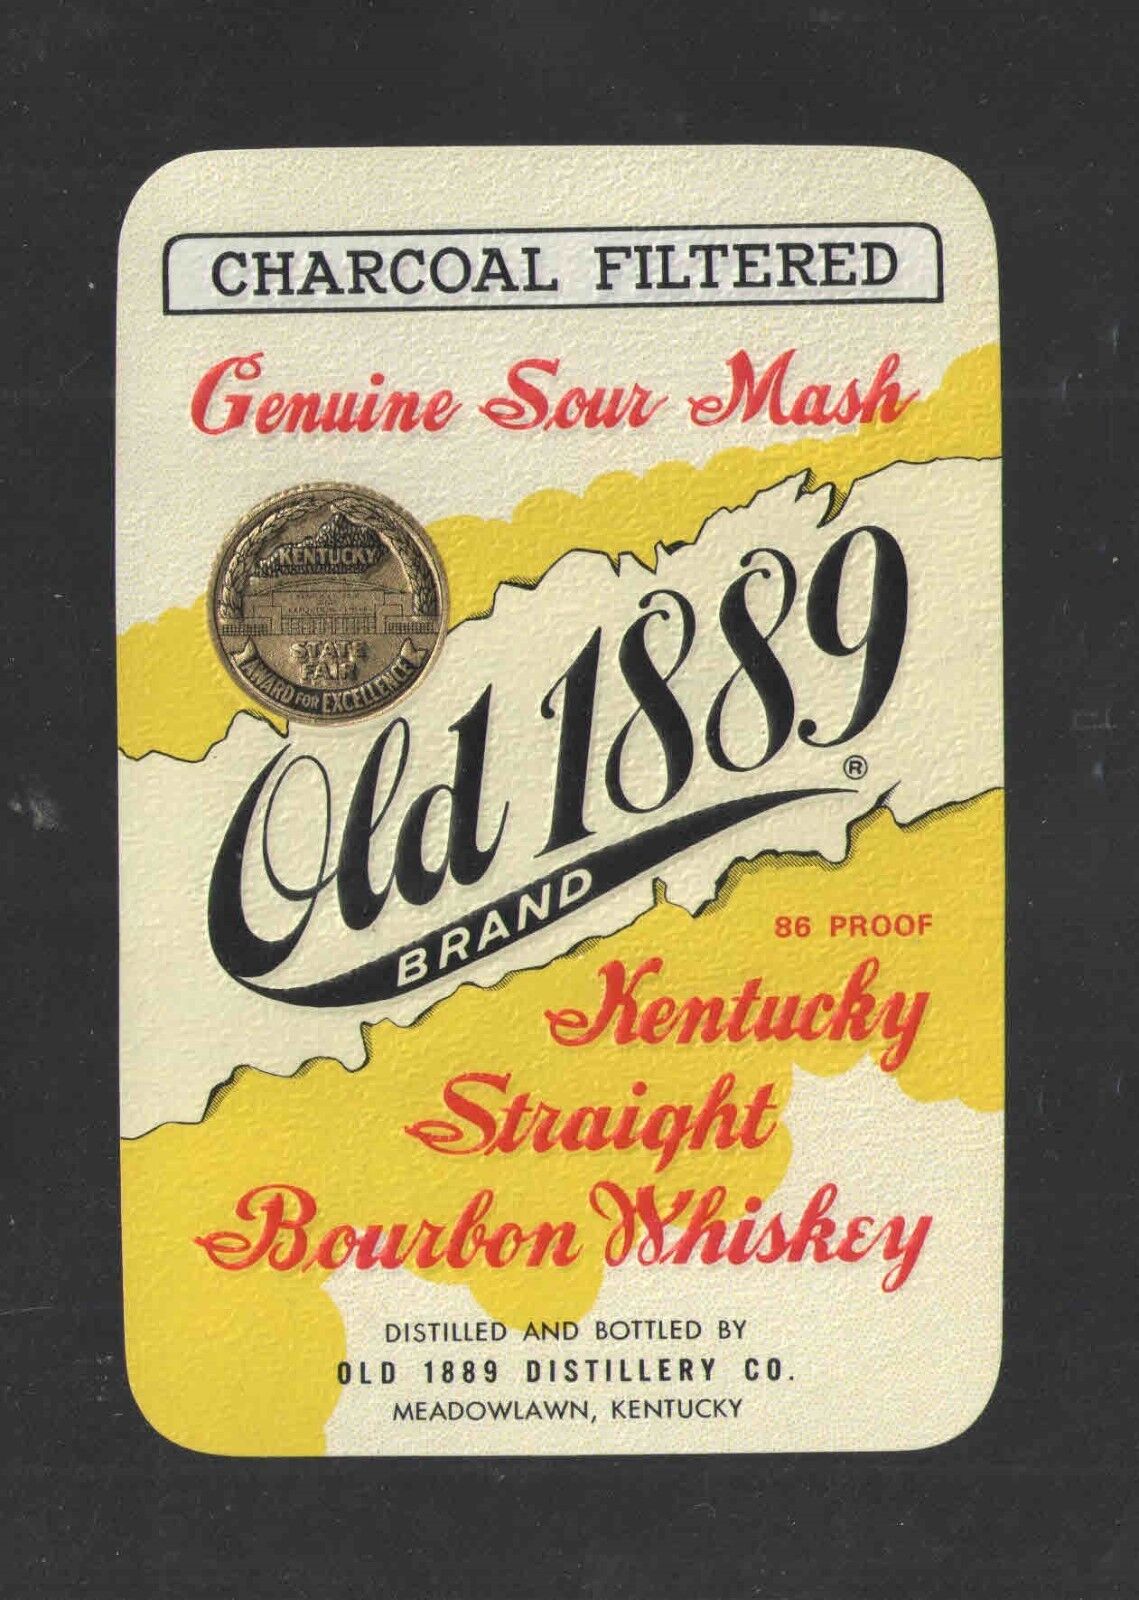 OLD 1889 BRAND KENTUCKY STRAIGHT BOURBON WHISKEY UNUSED BOTTLE LABEL - CHARCOAL